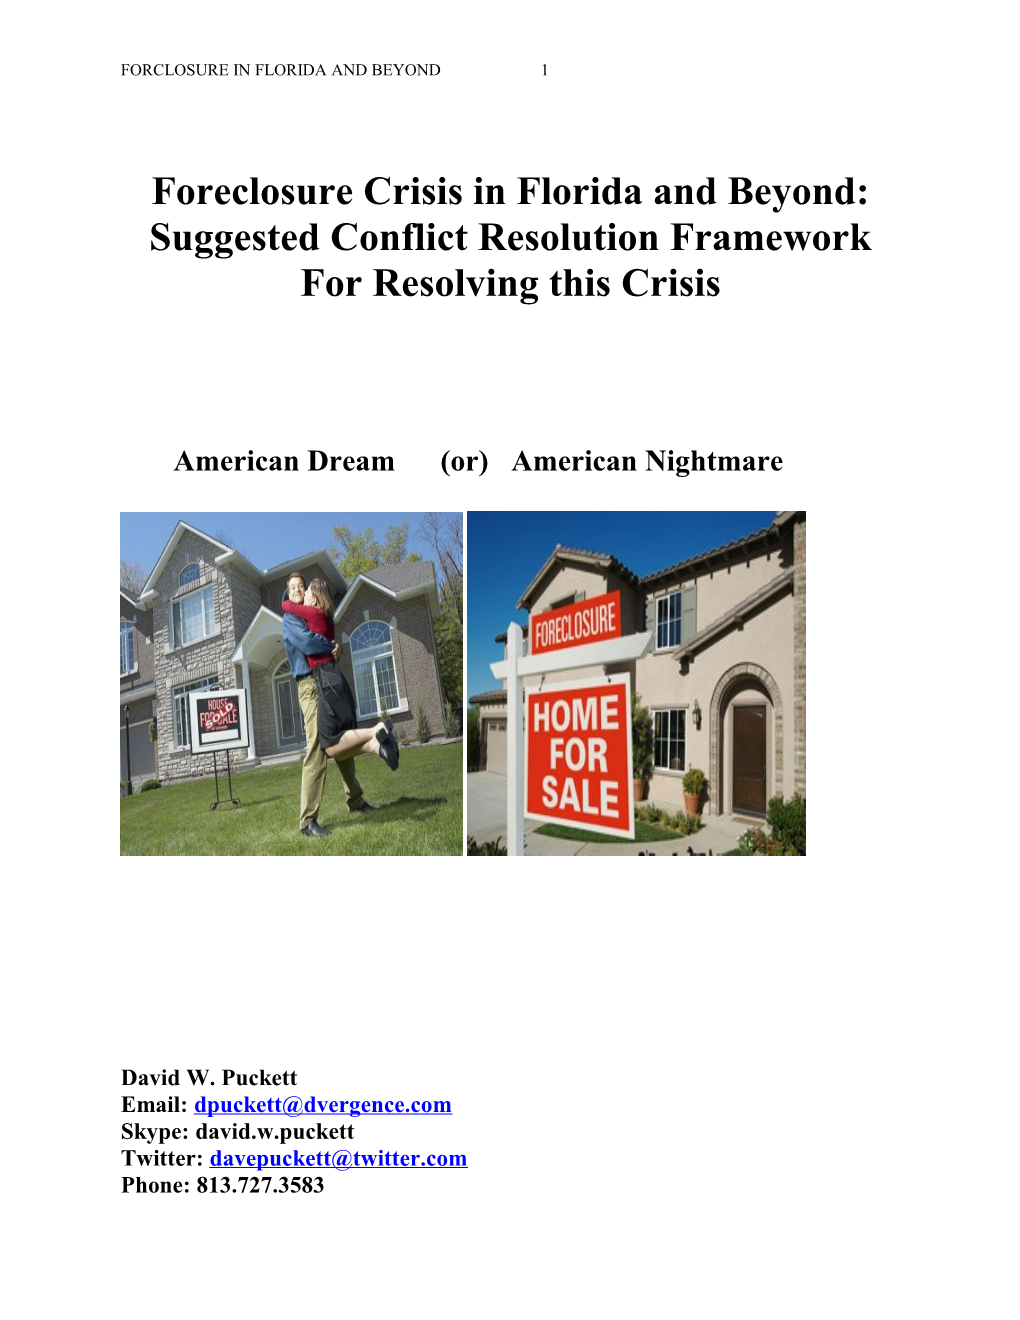 Foreclosure Crisis in Florida and Beyond